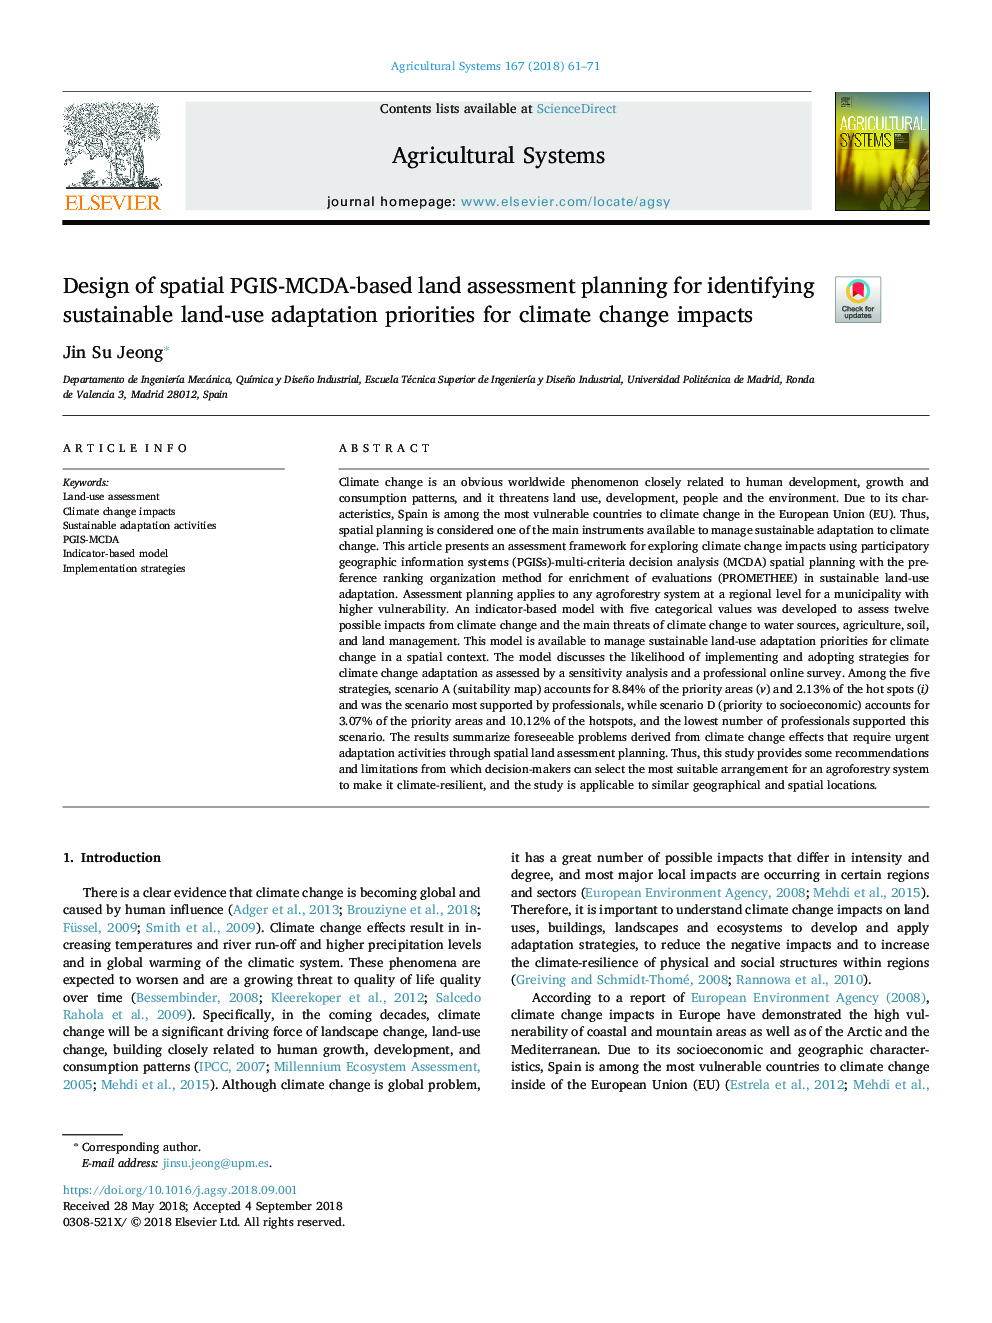 Design of spatial PGIS-MCDA-based land assessment planning for identifying sustainable land-use adaptation priorities for climate change impacts